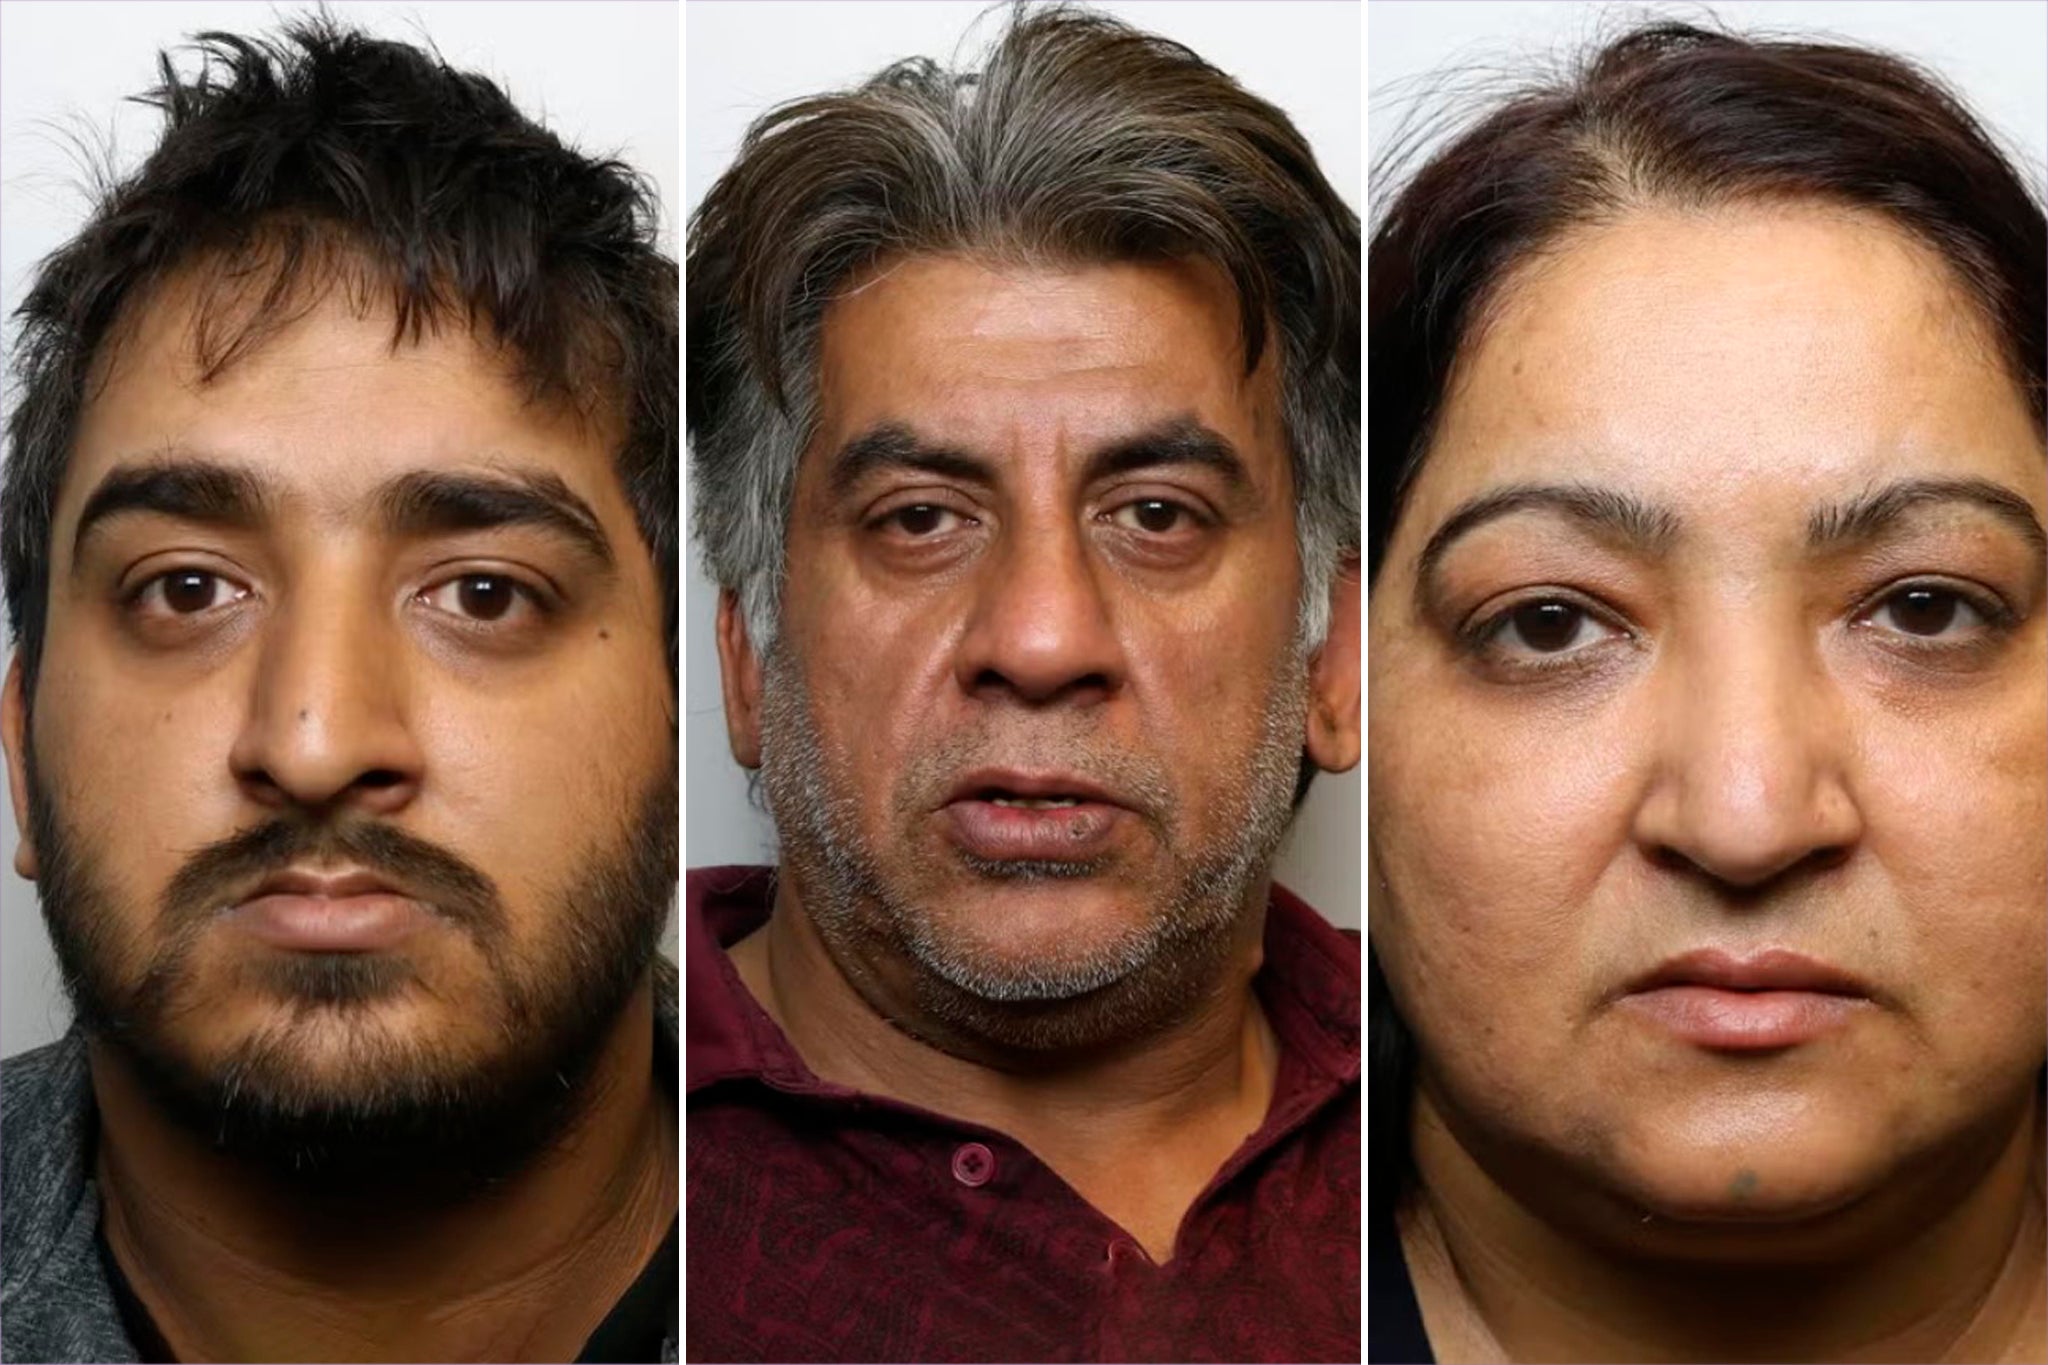 A family who left an arranged marriage bride in a vegetative state after she was forced to take pills and doused with a corrosive substance has been jailed